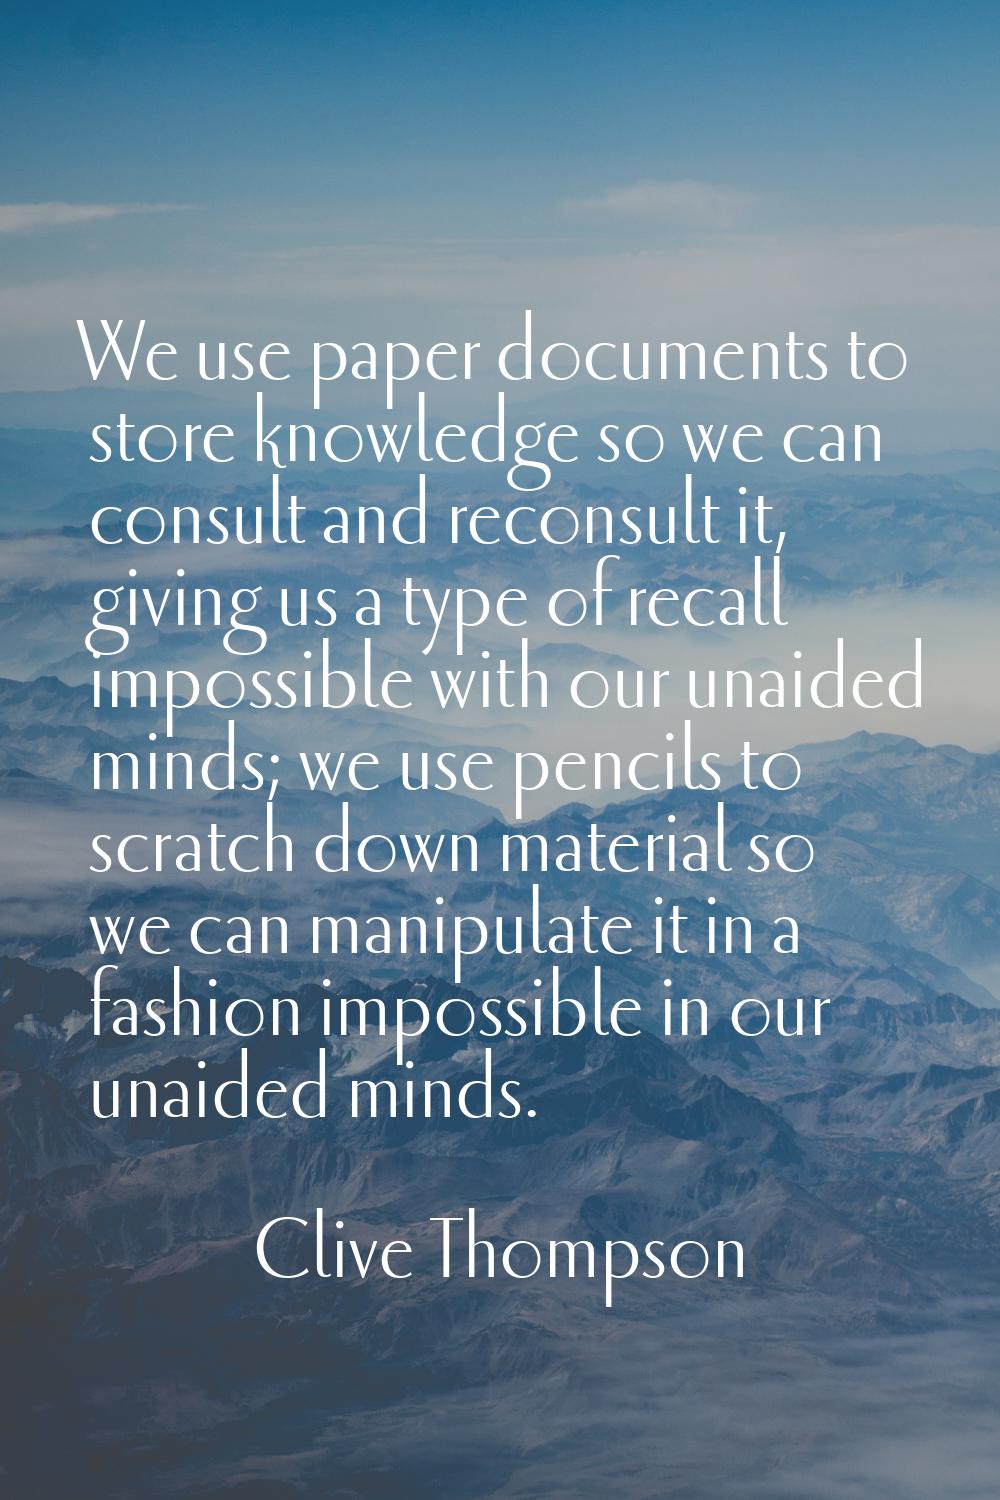 We use paper documents to store knowledge so we can consult and reconsult it, giving us a type of r